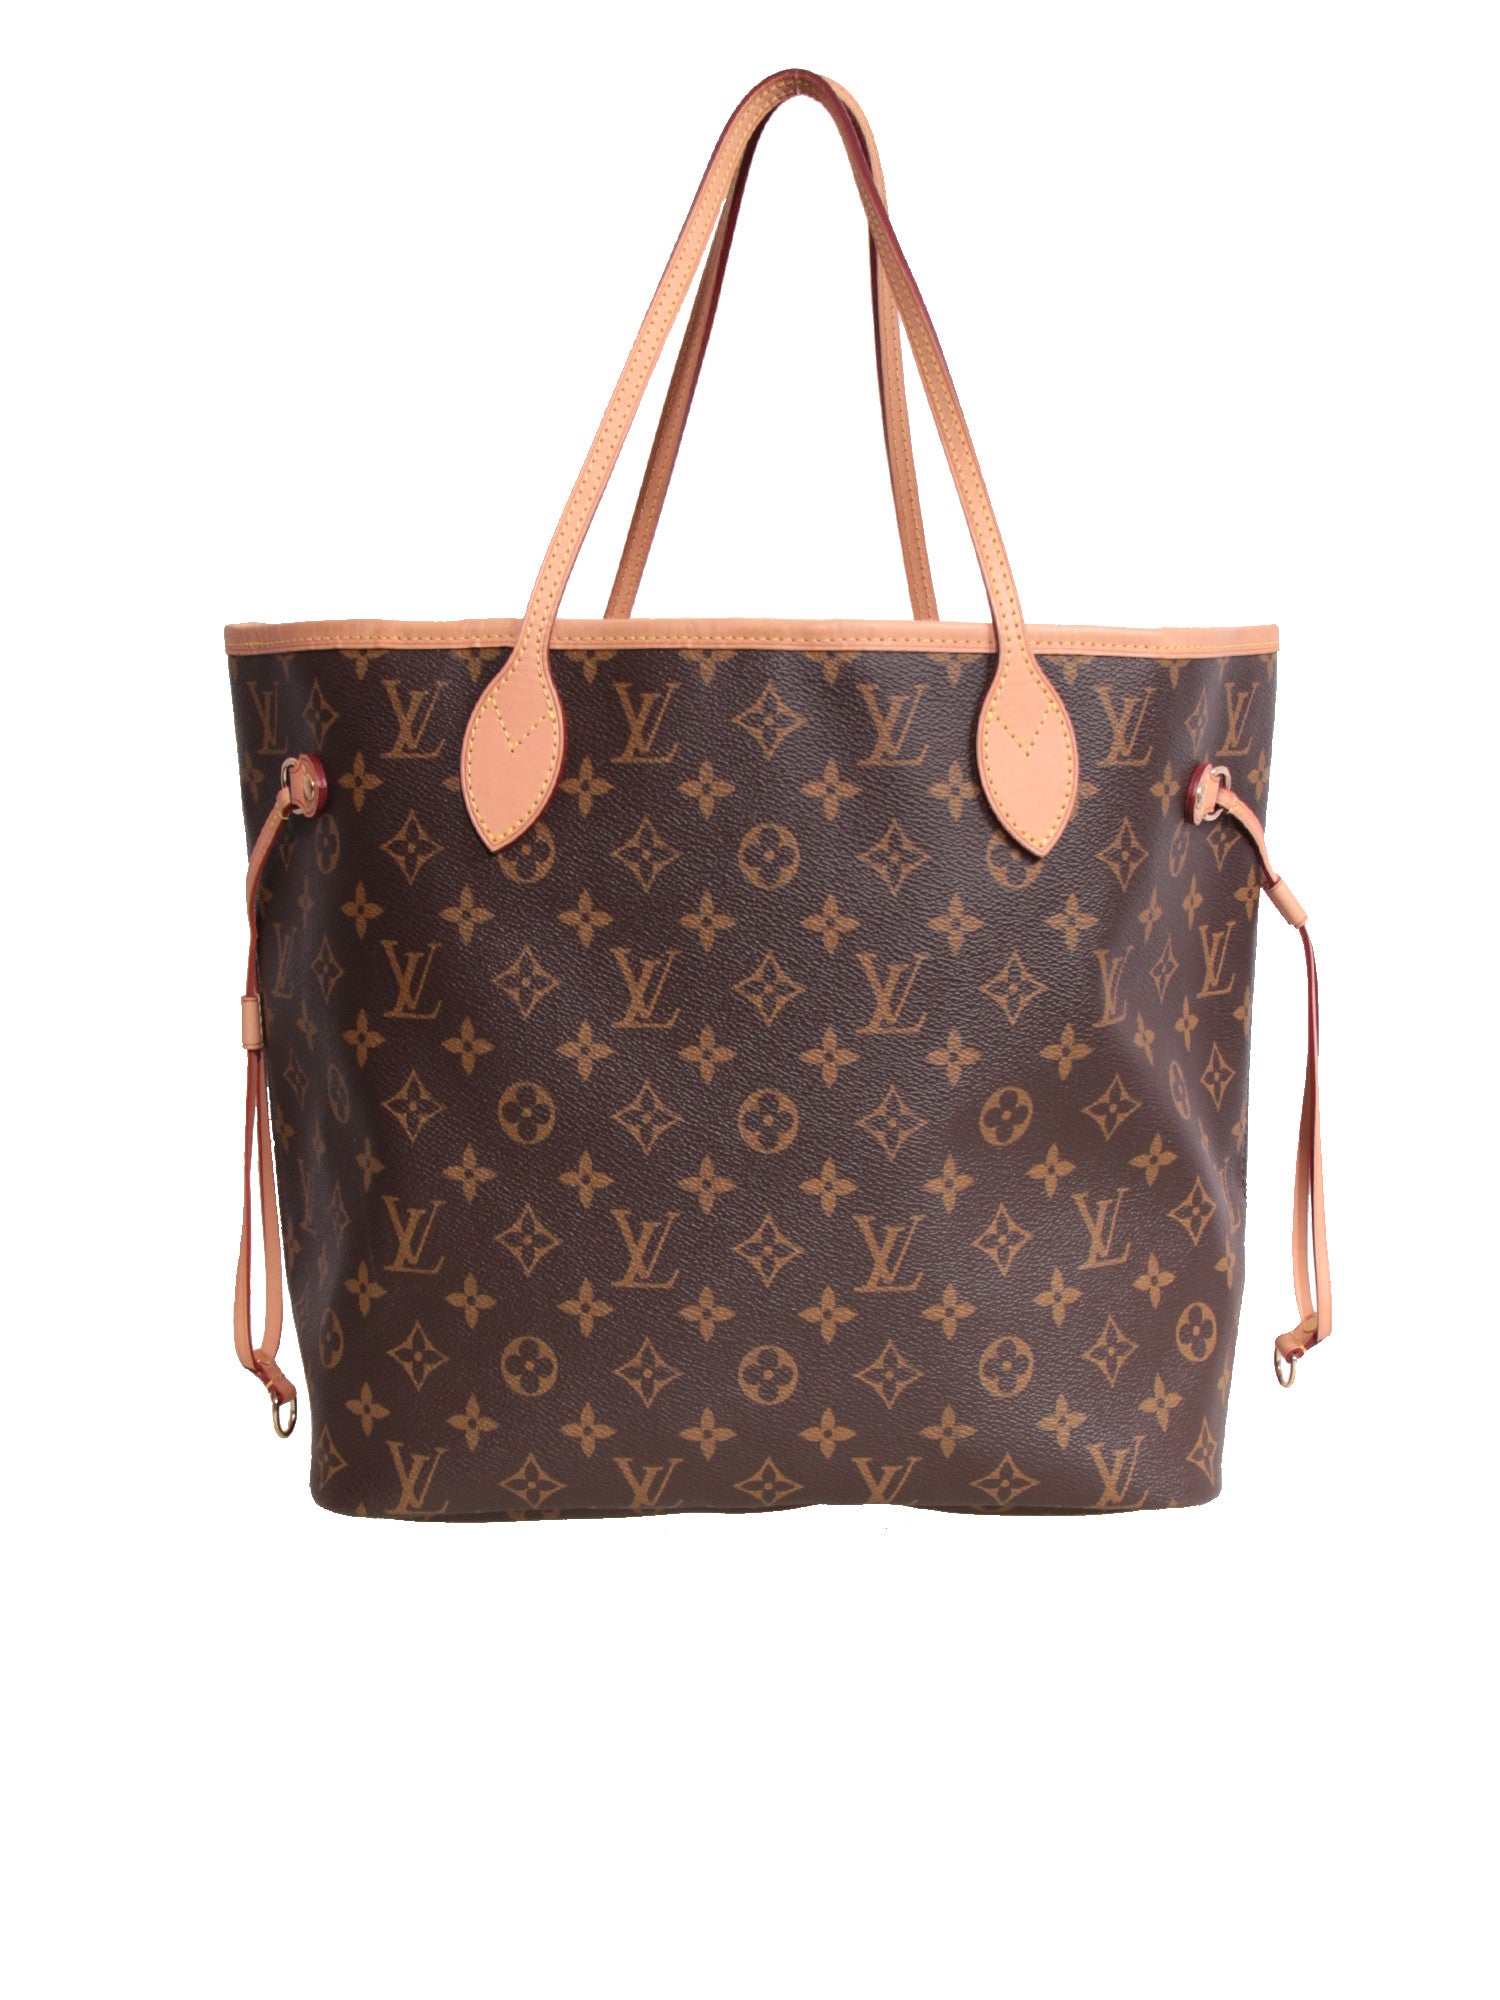 Authentic Louis Vuitton Neverfull MM Revamp PRE-LOVED Sarah's Closet